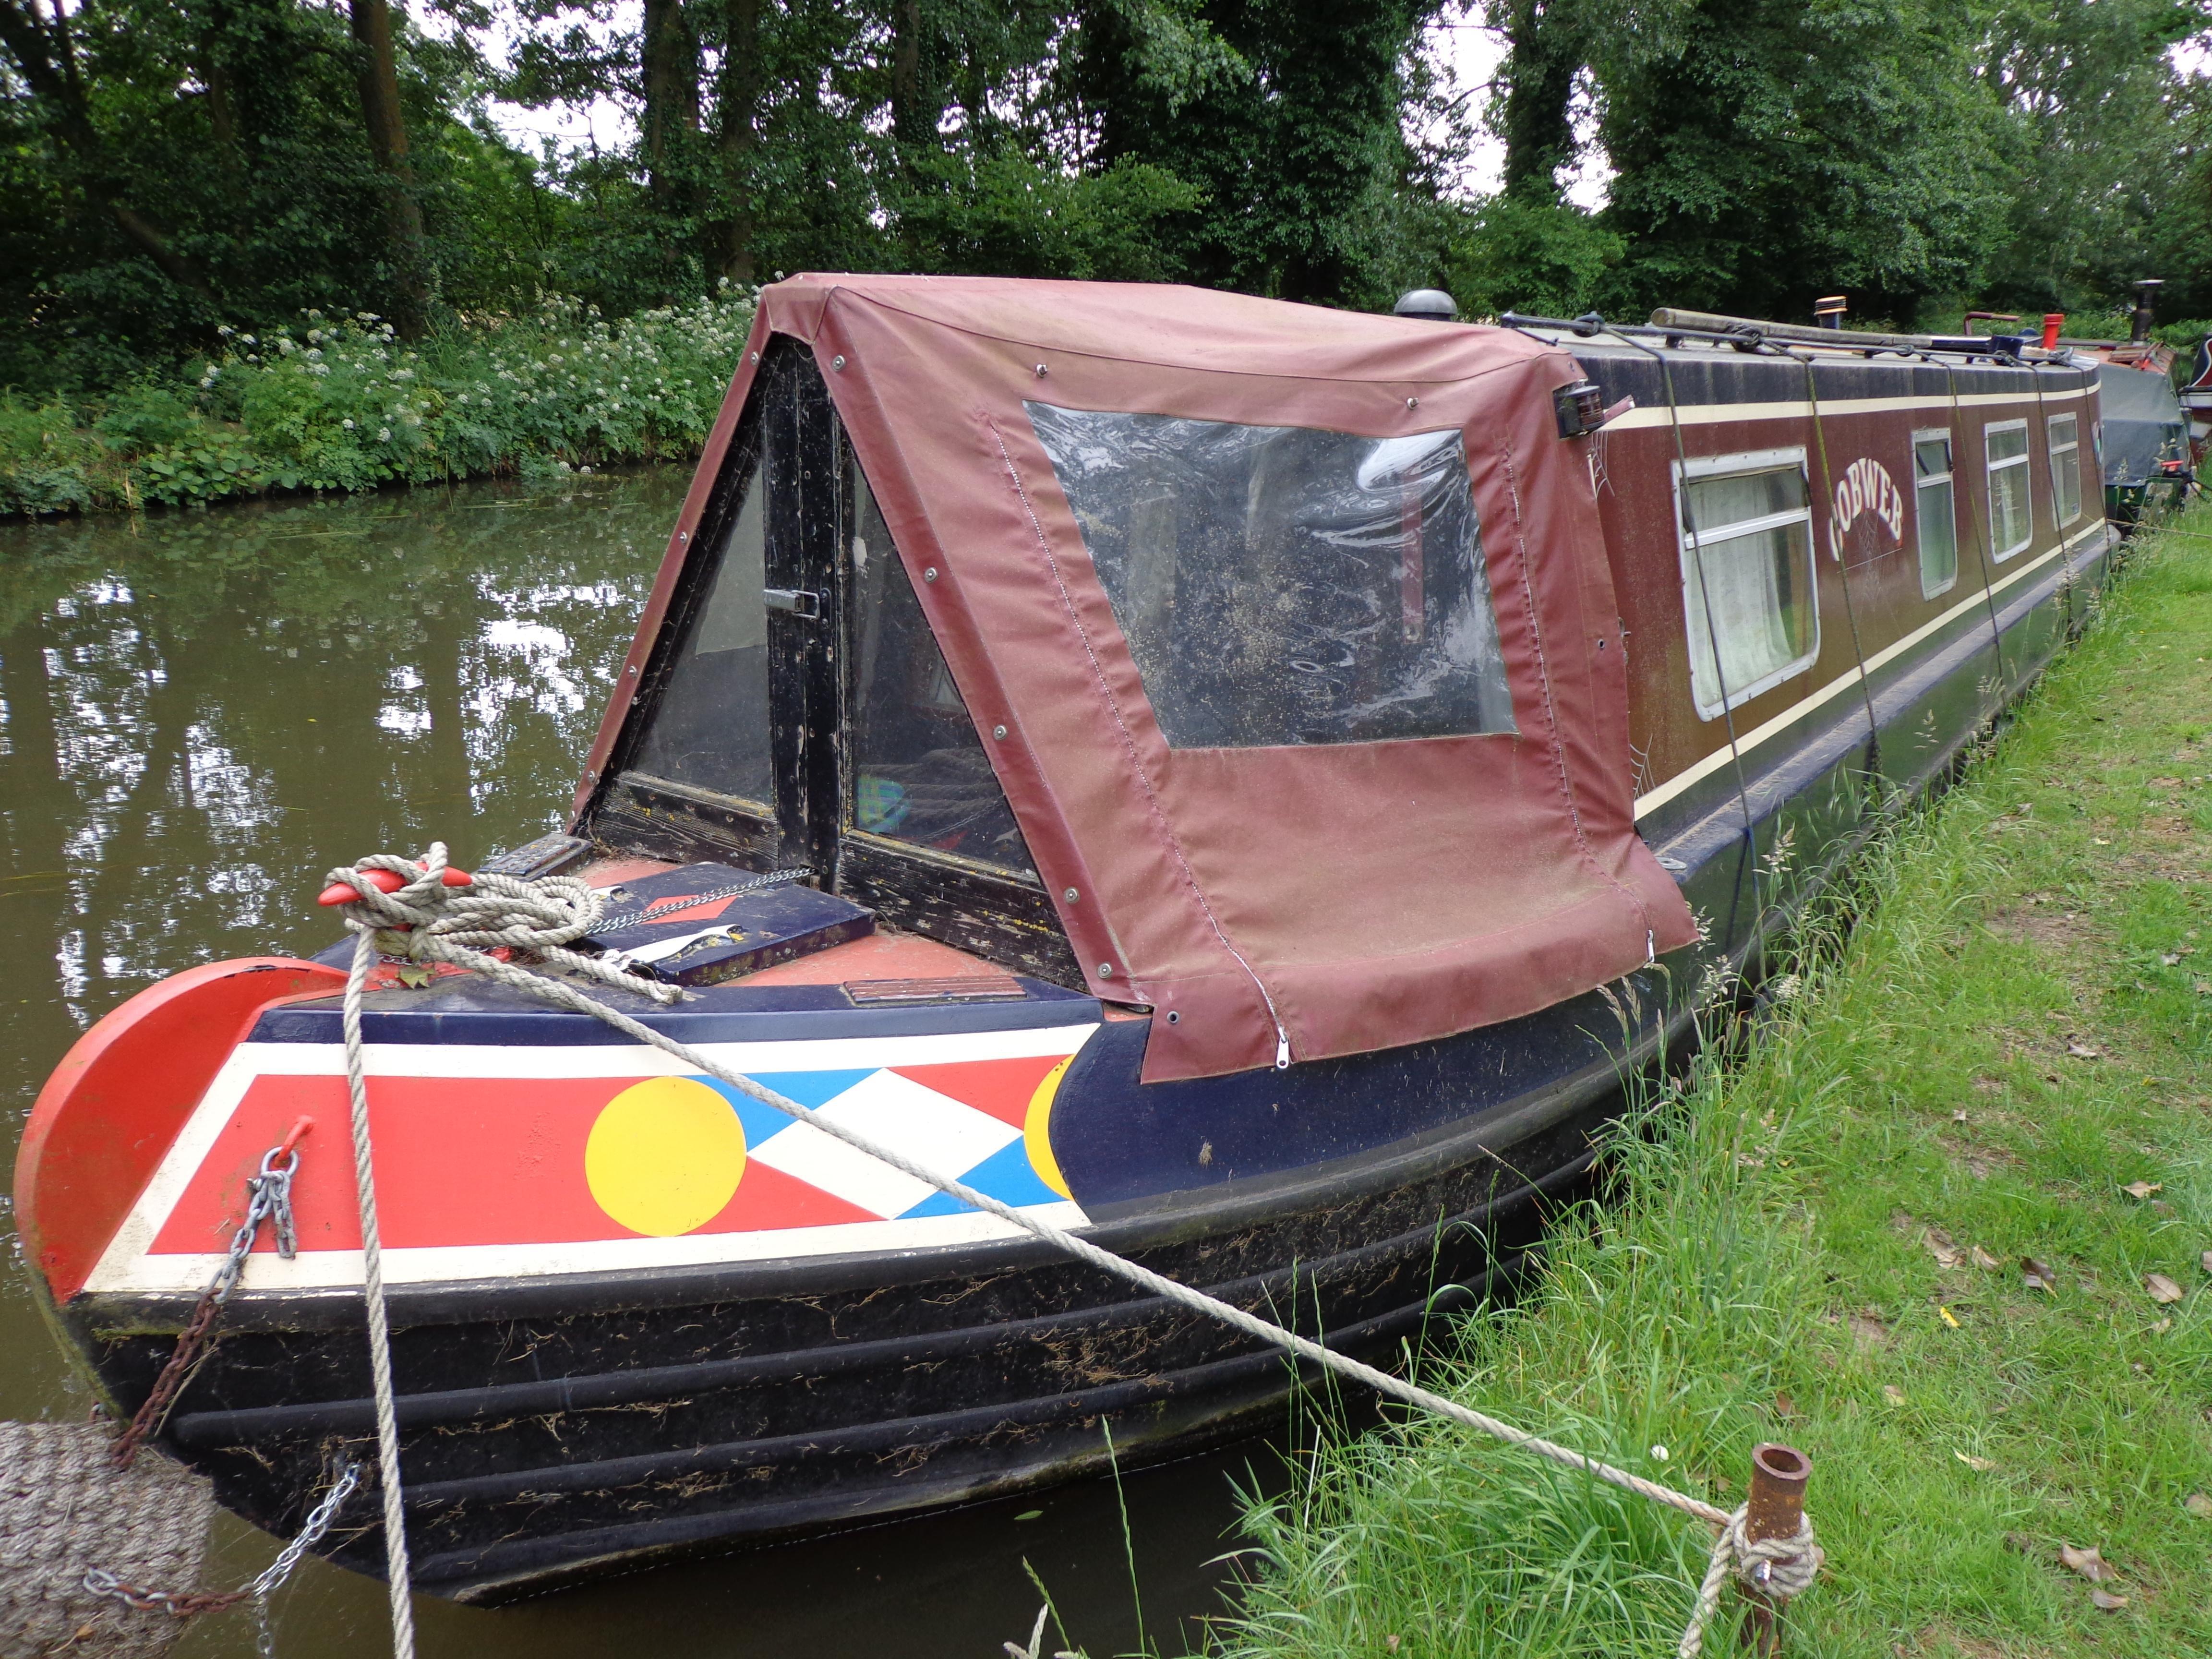 Narrow Boat Colesmorton Marine with Traditional Stern, Pyrford Marina on River Wey, Surrey